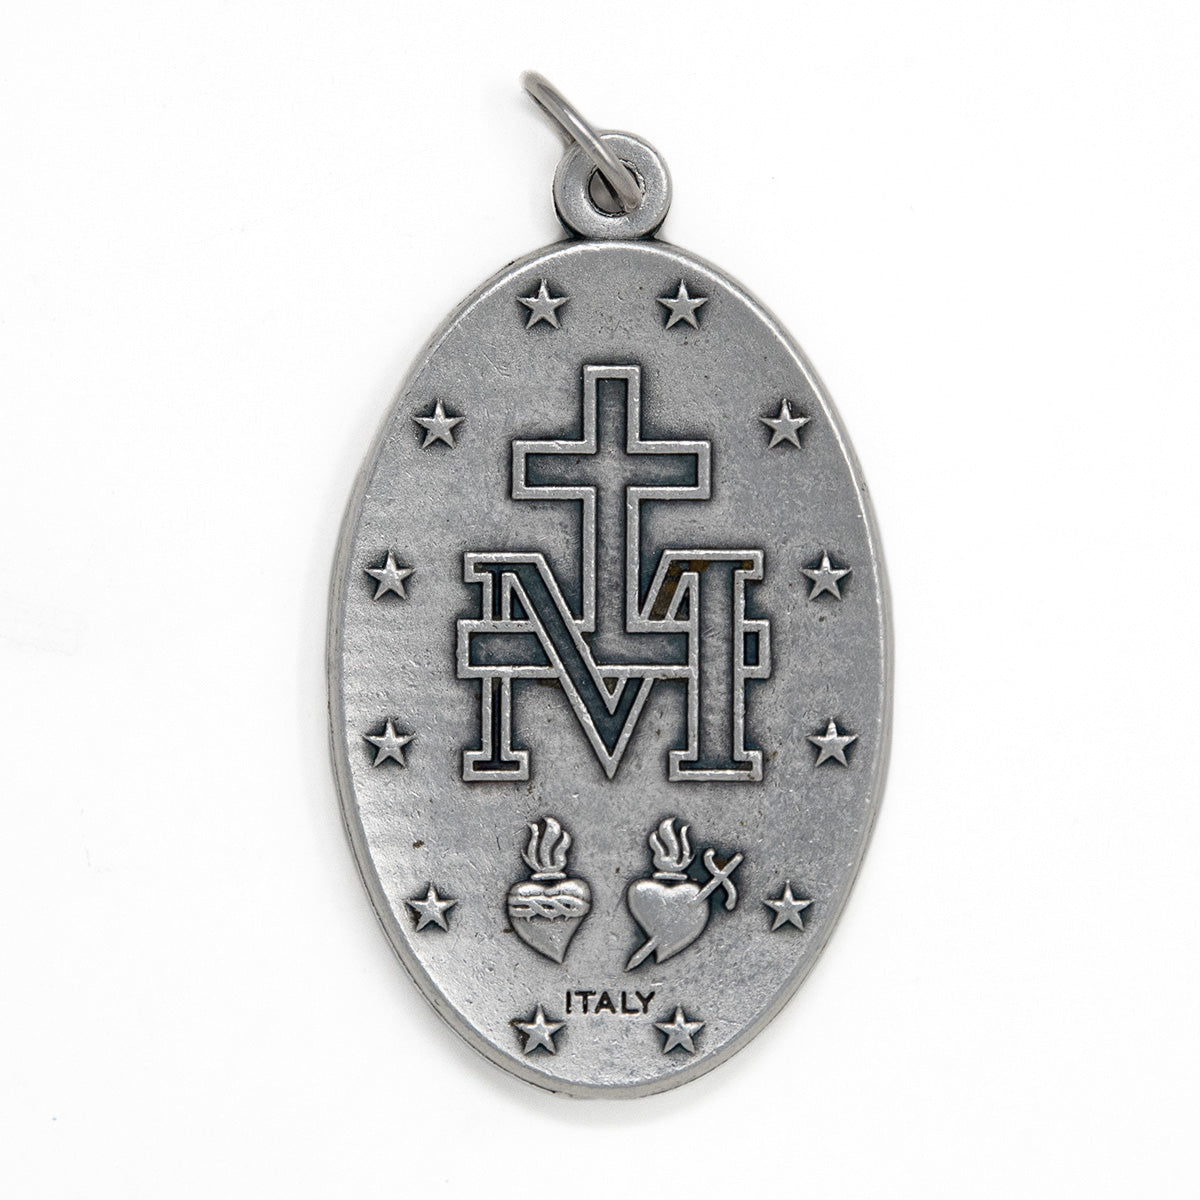 Large Miraculous Medal in English - scapulars.com®